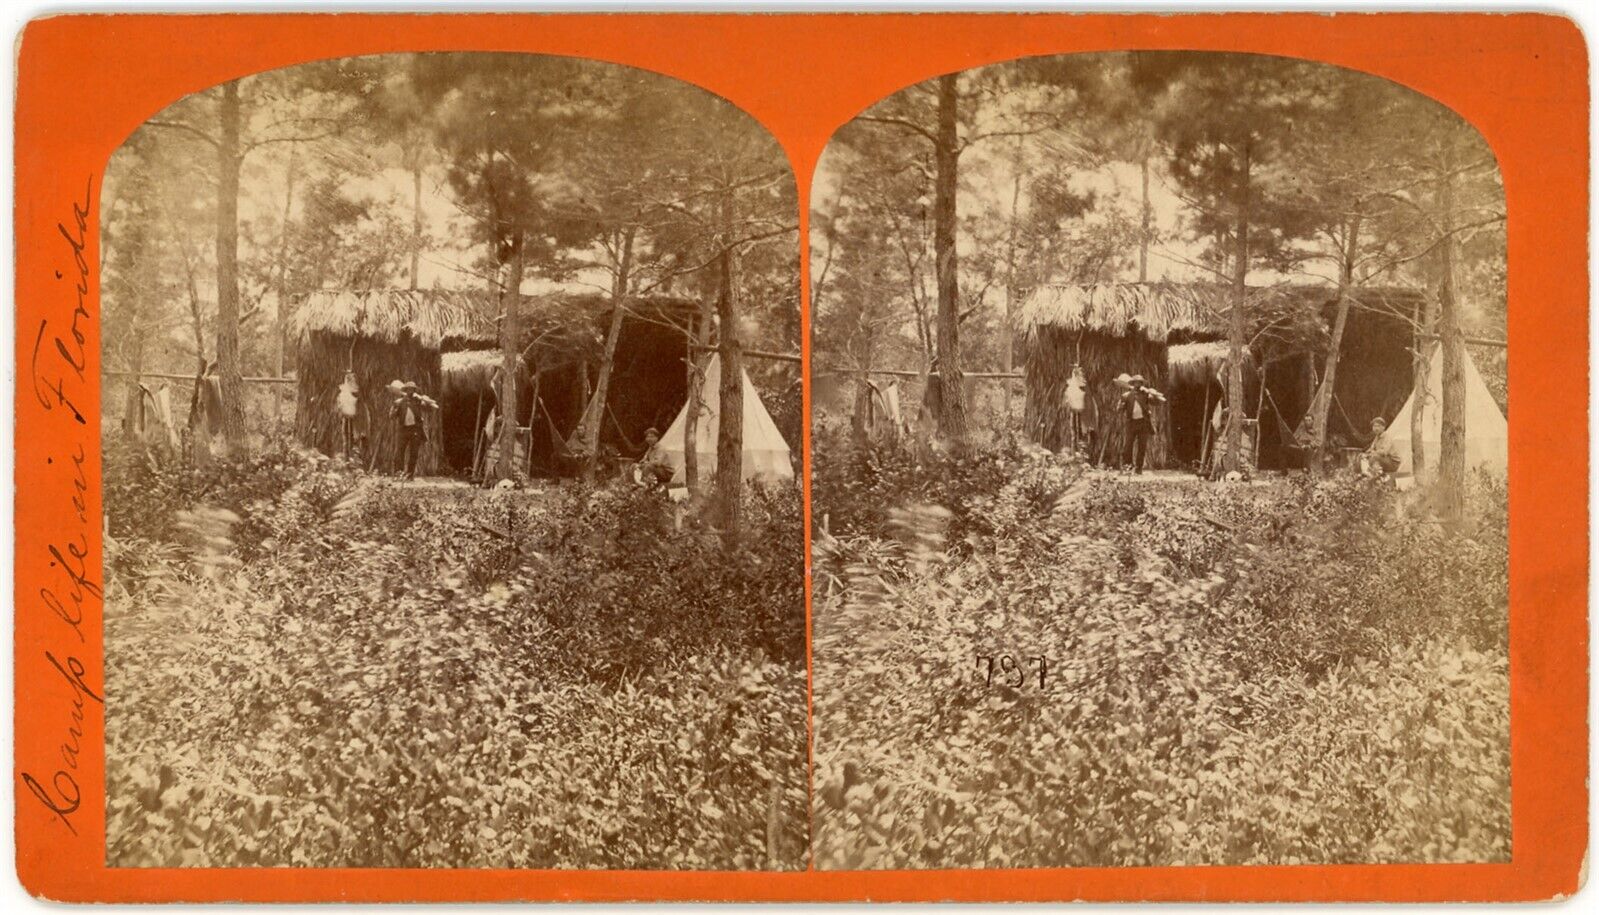 FLORIDA SV - Camping Scene in Forest - 1880s RARE